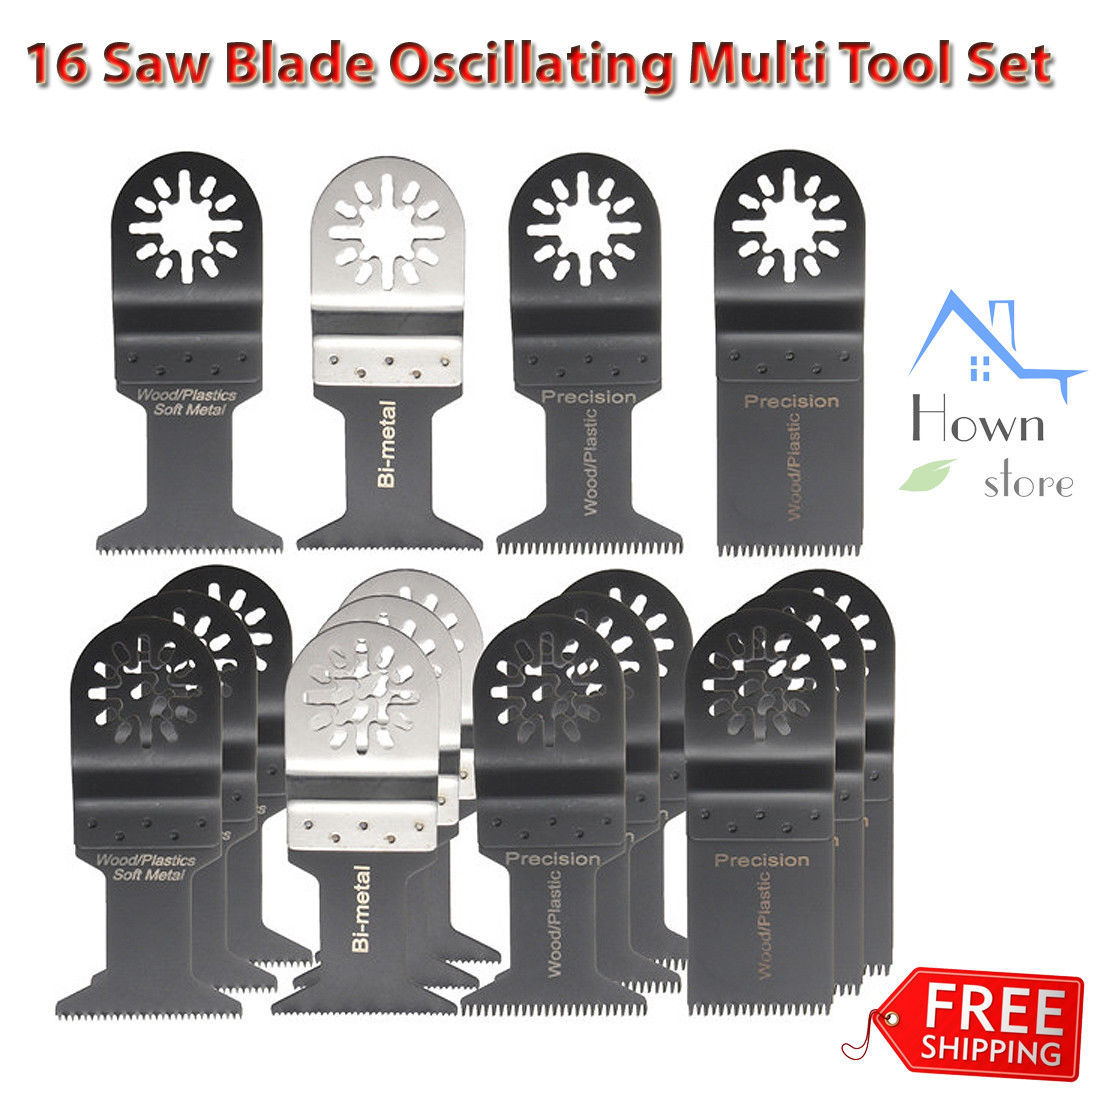 16pcs Mixed Oscillating Multi Tool Saw Blade Accessories Set For Fein Multimaster Bosch Makita